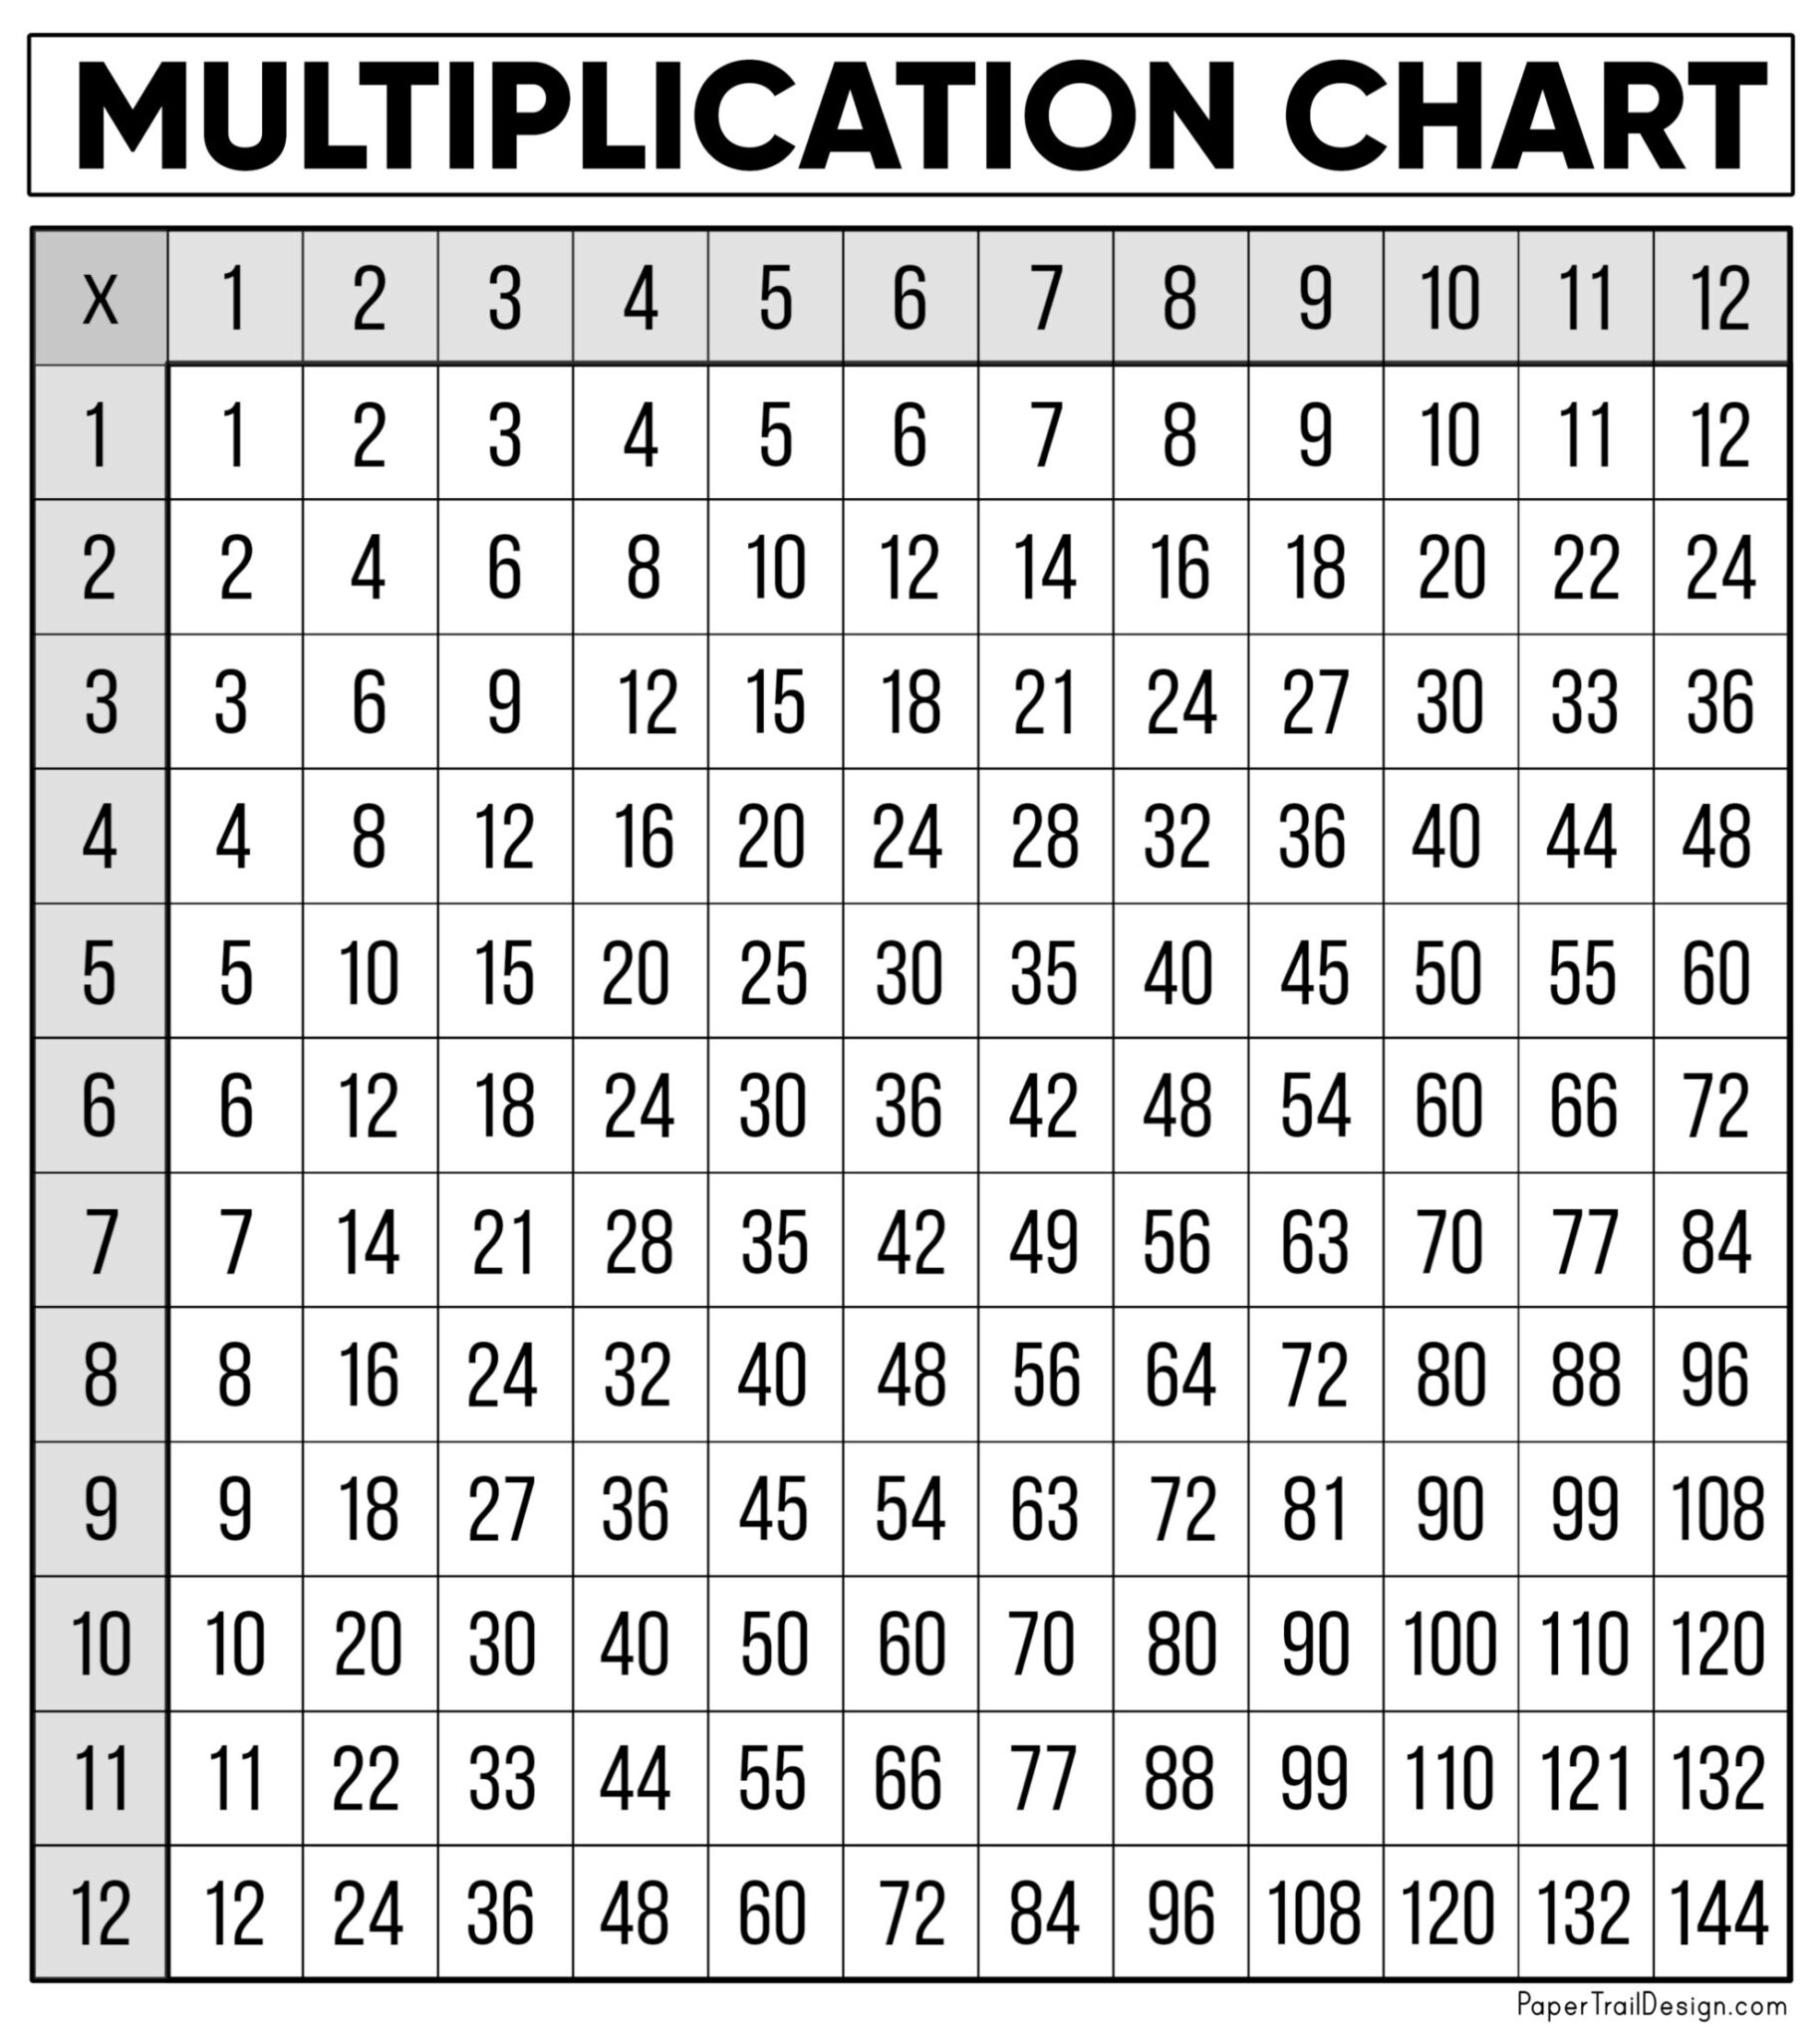 A chart representing multiplication